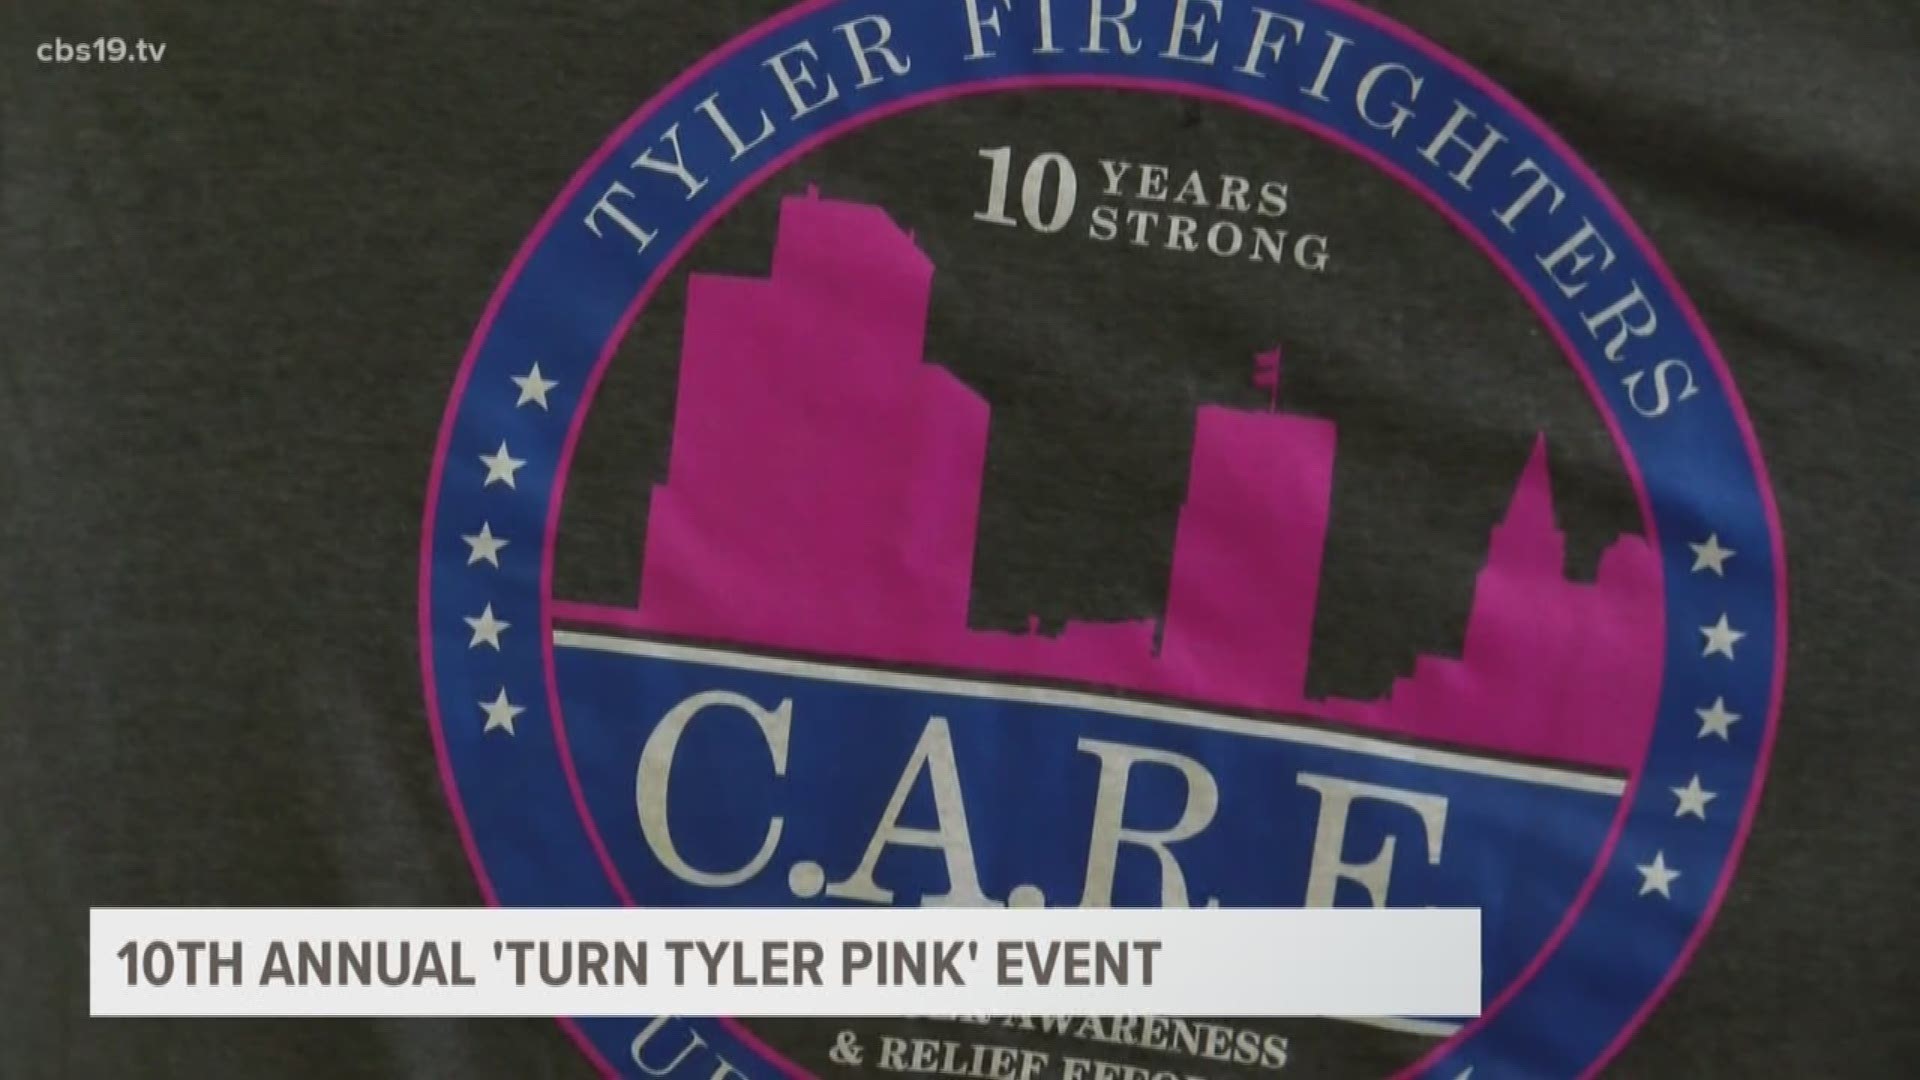 Head out to one of four locations in Tyler to purchase a CARE shirt from the Tyler Fire Fighters Association.